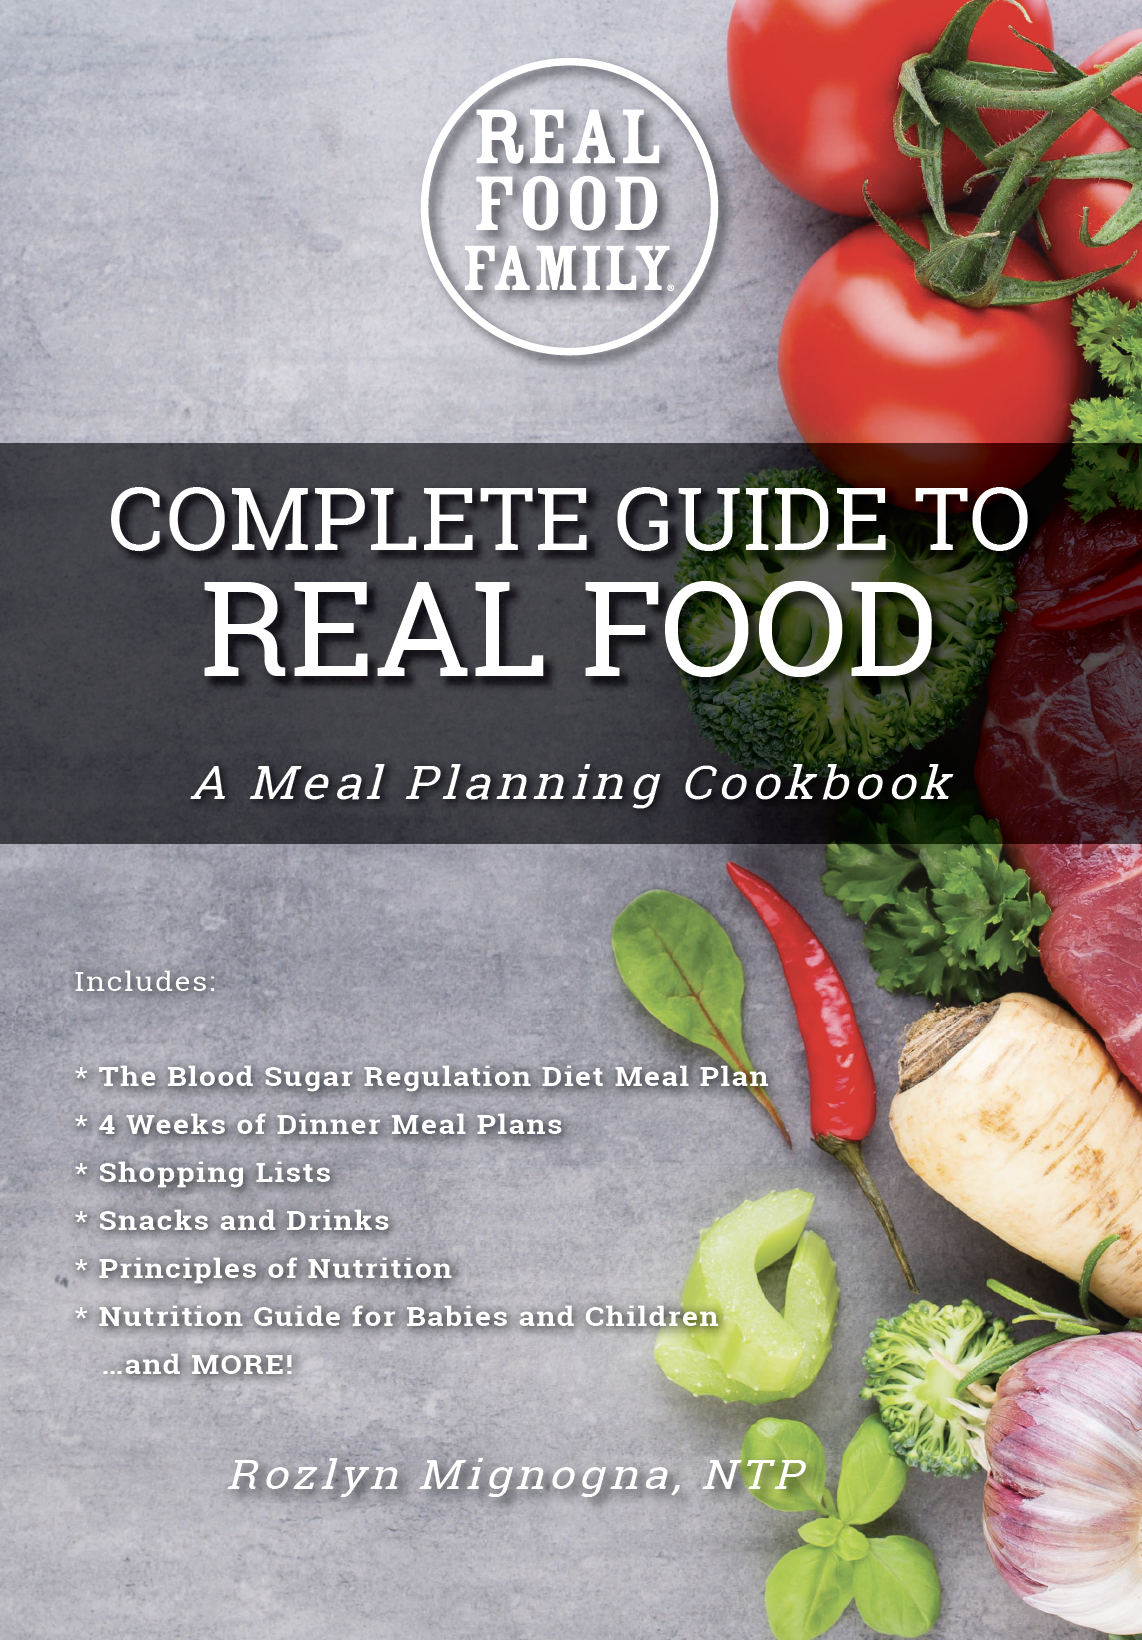 Ultimate Guide to Family Recipes Cookbook Design